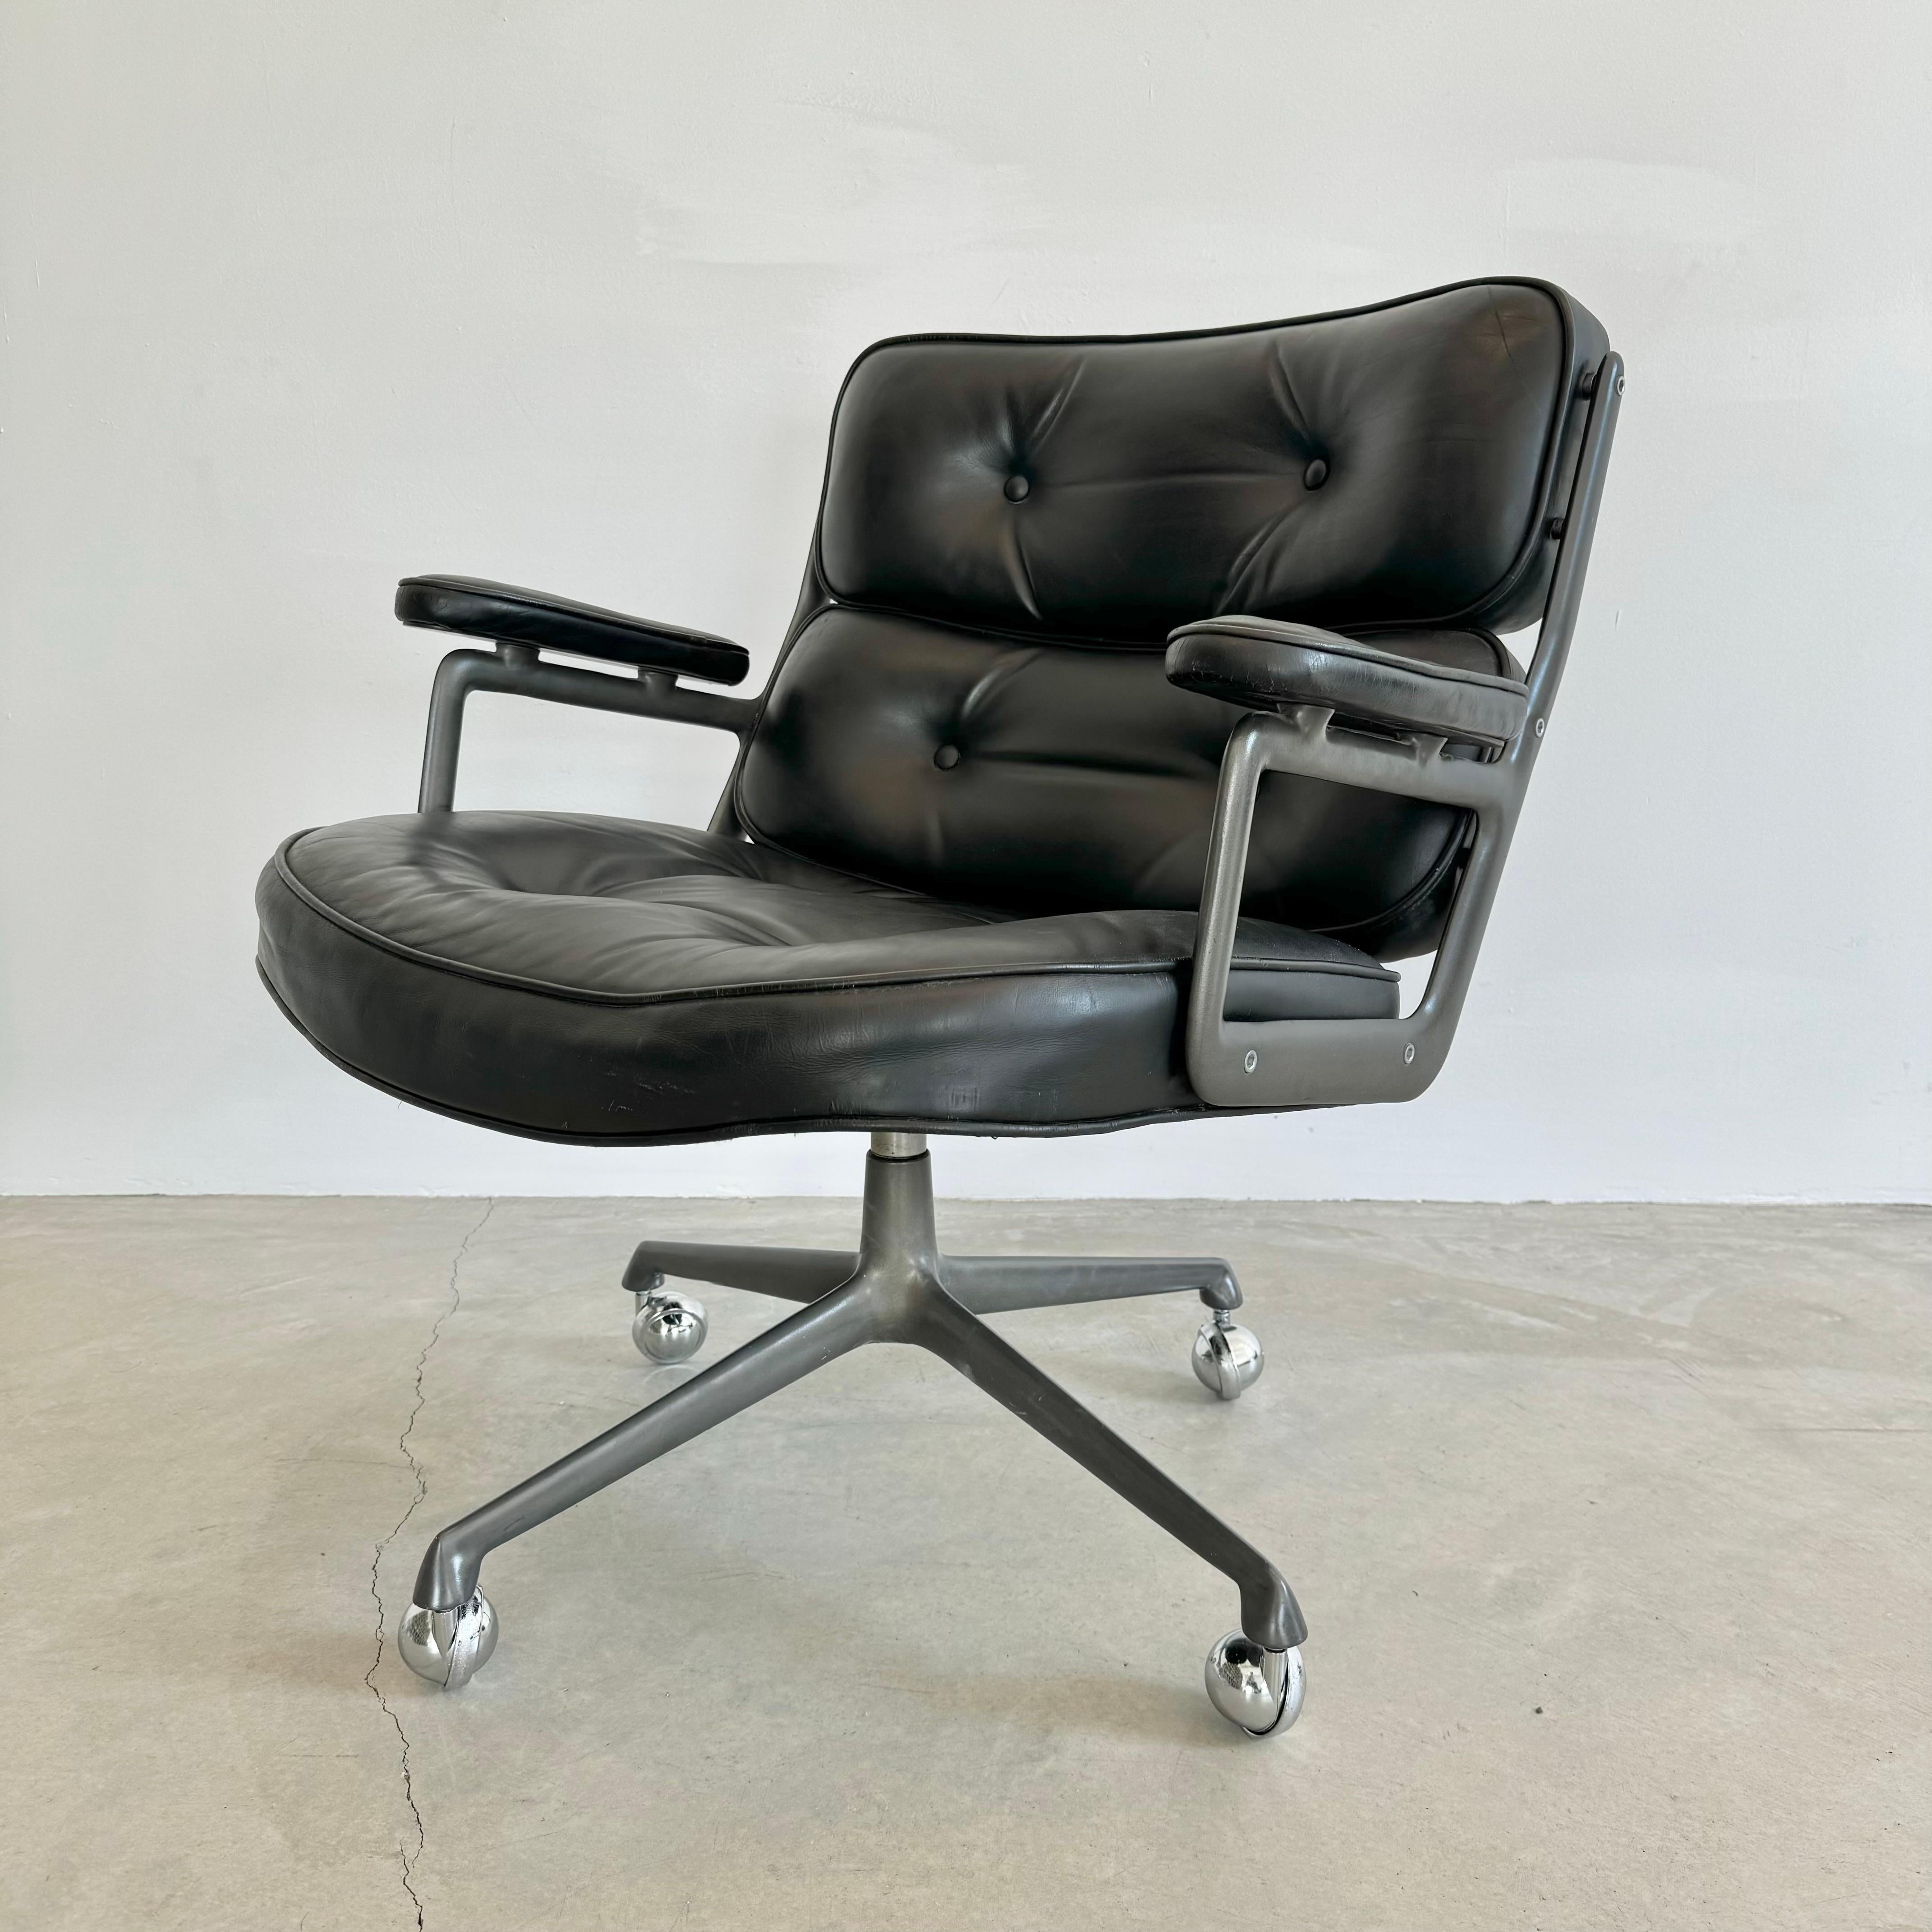 Late 20th Century Eames Time Life Lobby Lounge Chair in Black Leather for Herman Miller, 1980s USA For Sale